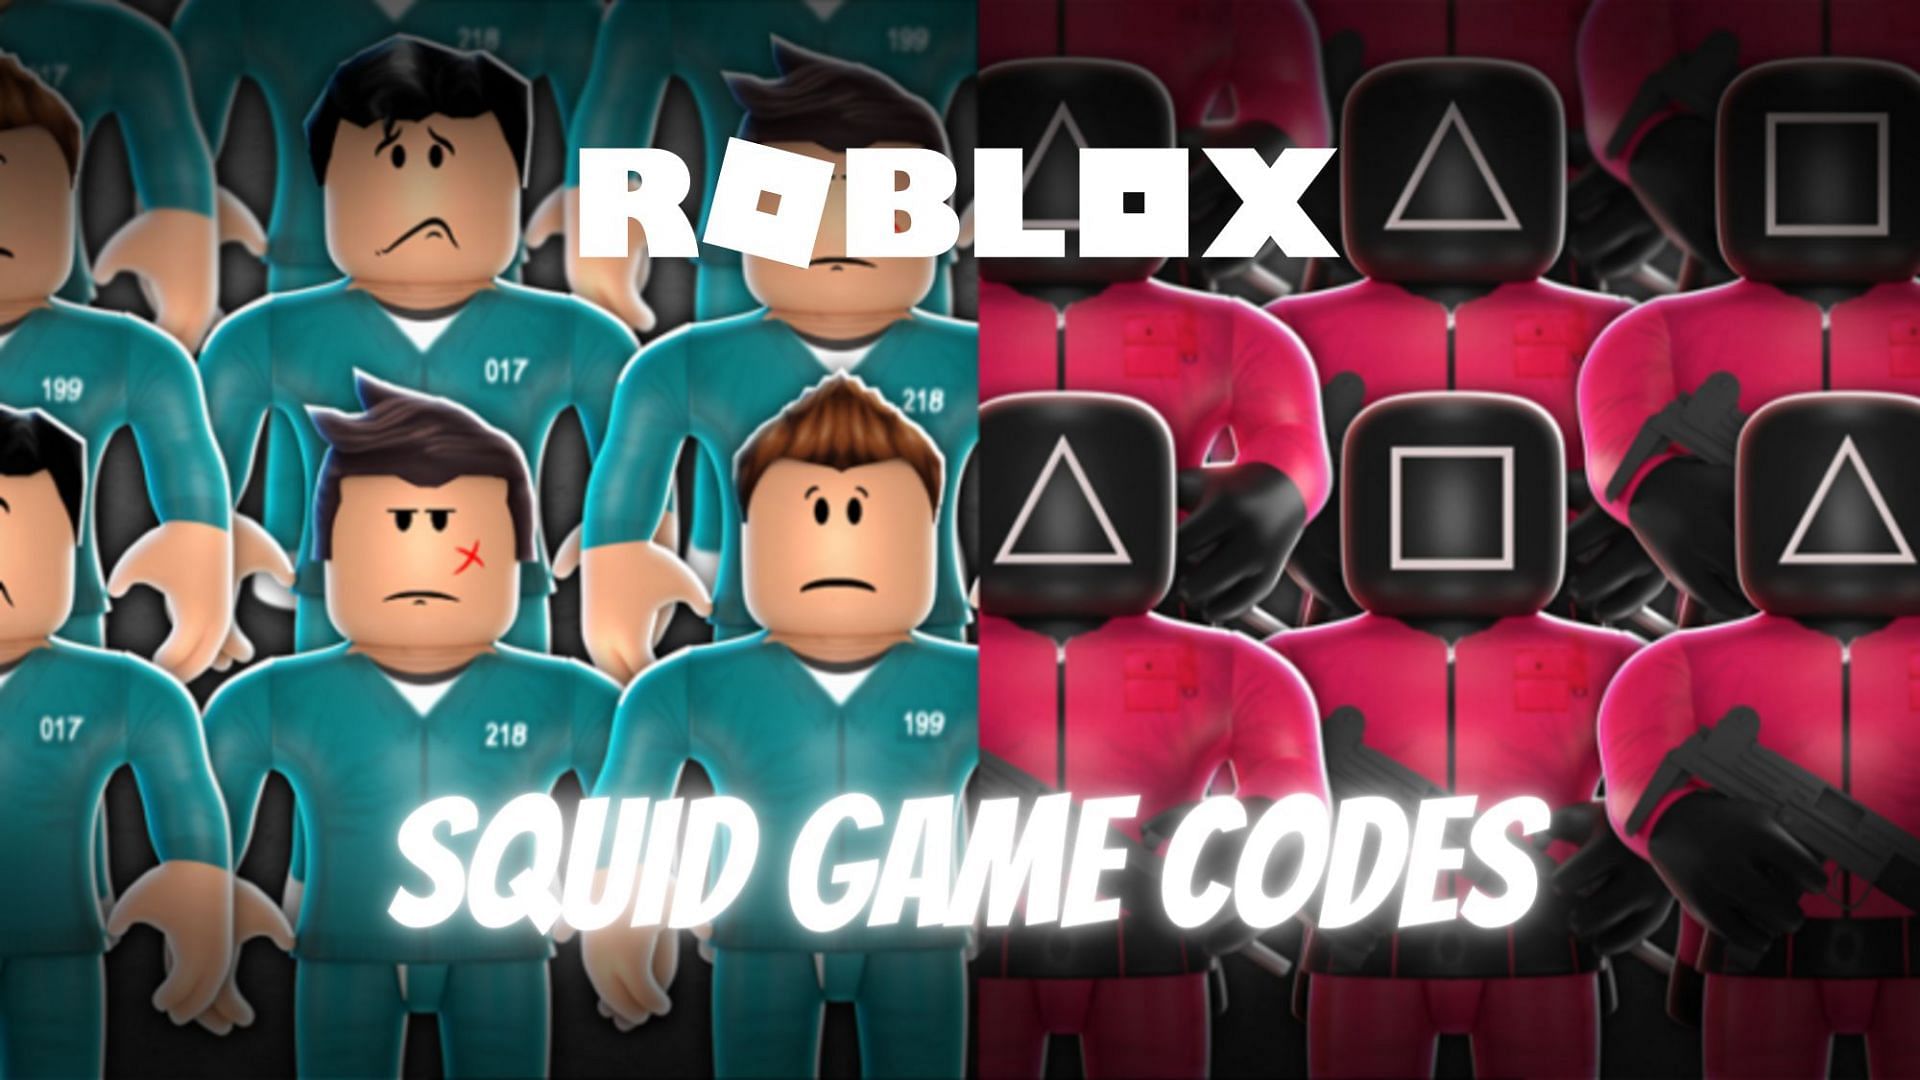 Enjoy competing in the Squid games (Image via Roblox)